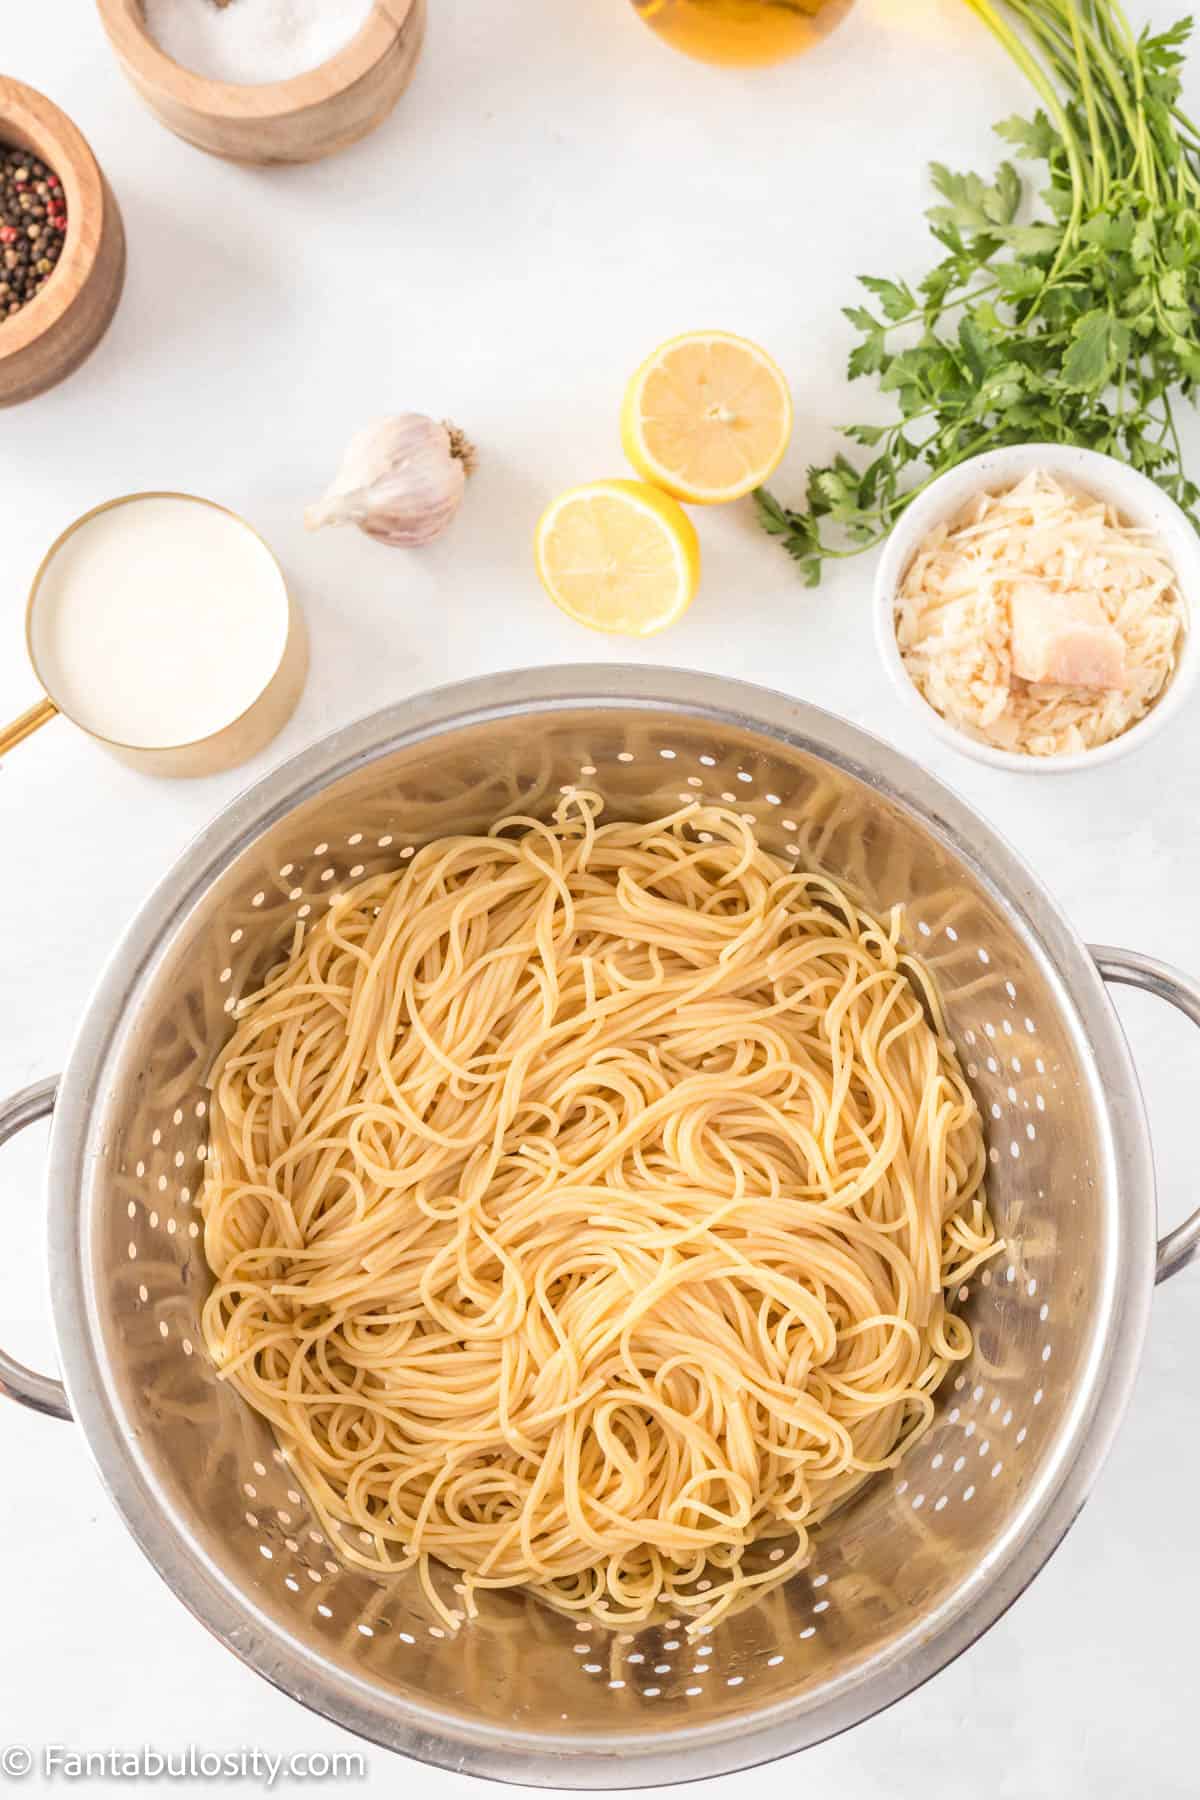 Cooked spaghetti noodles for Creamy Lemon Chicken Pasta are sitting in a colander surrounded by lemons, garlic, parsley and Parmesan cheese